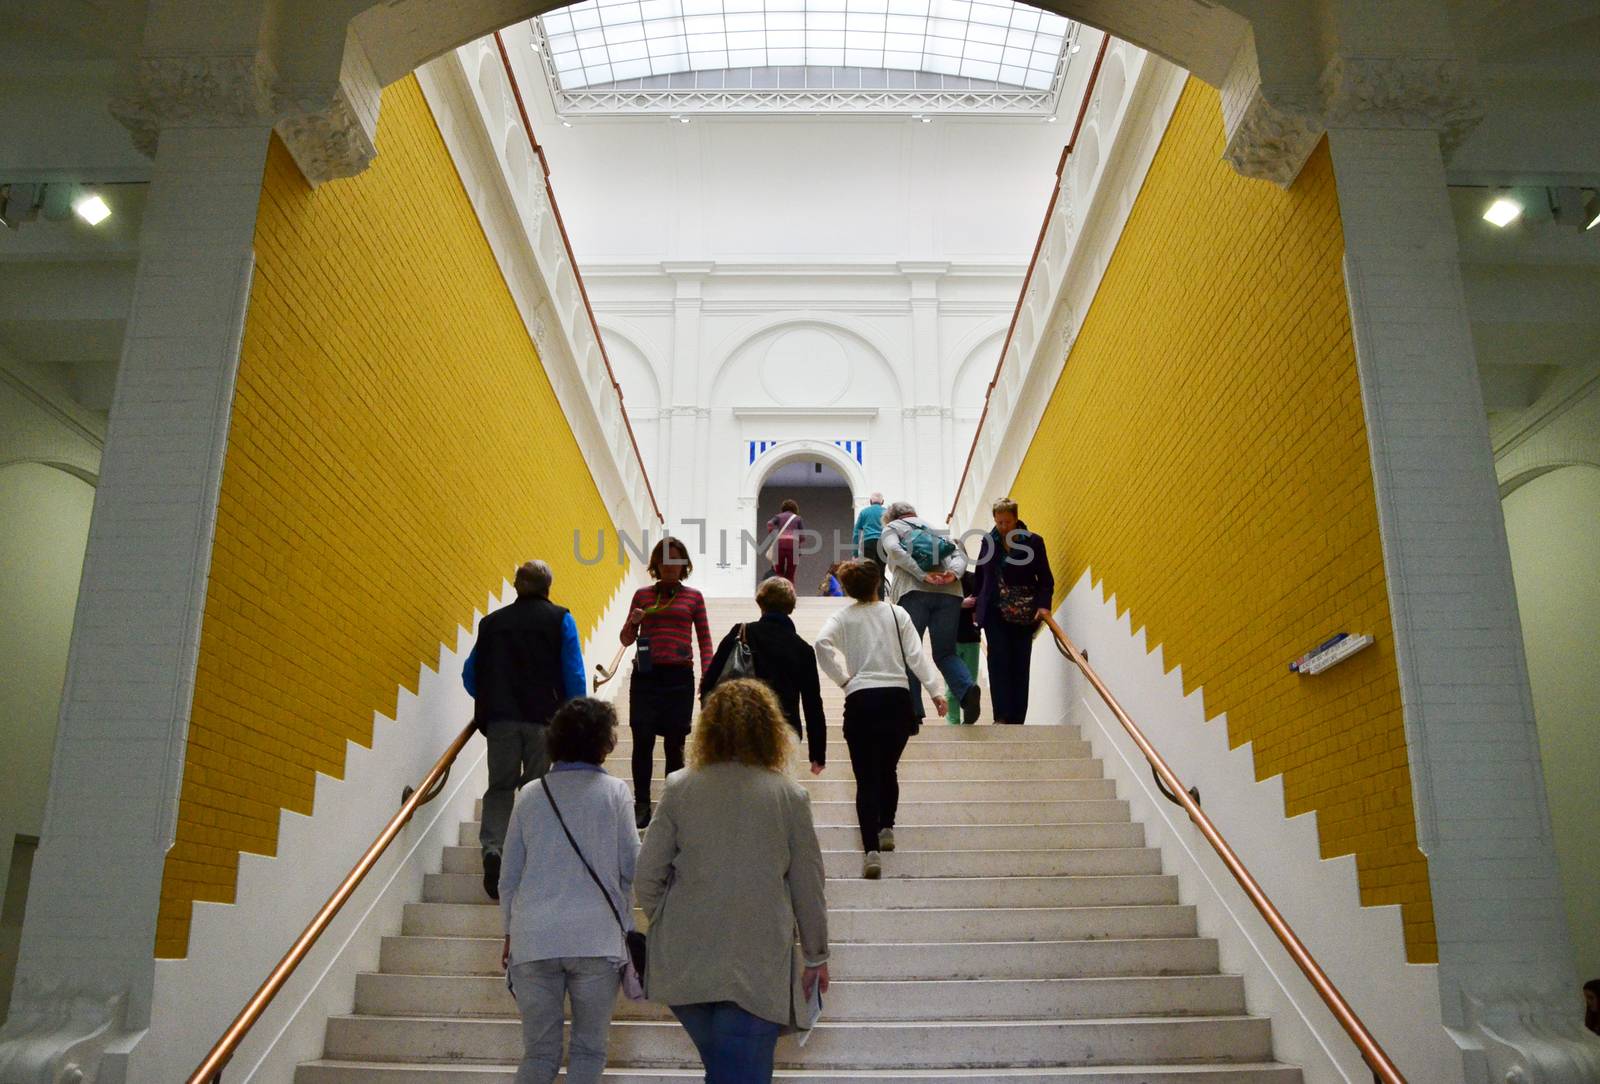 Amsterdam, Netherlands - May 6, 2015: People visit Stedelijk Museum in Amsterdam located in the museum park, Netherlands on May 6, 2015